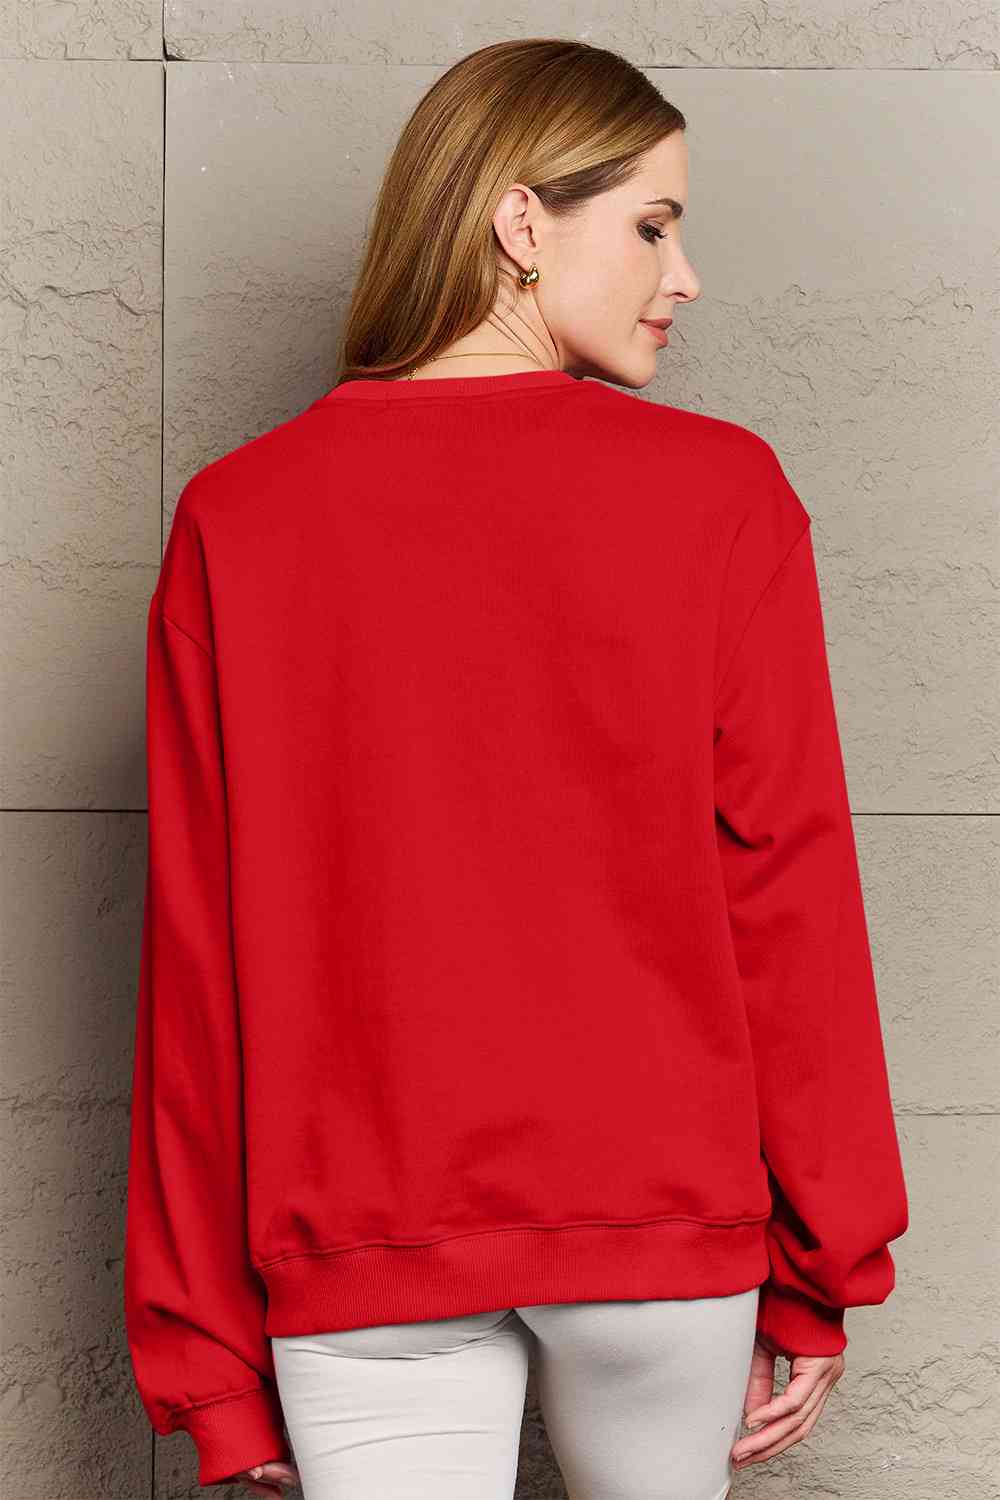 Firebrick Simply Love Full Size SLEIGHIN&#39; IT Graphic Sweatshirt Sentient Beauty Fashions Apparel &amp; Accessories